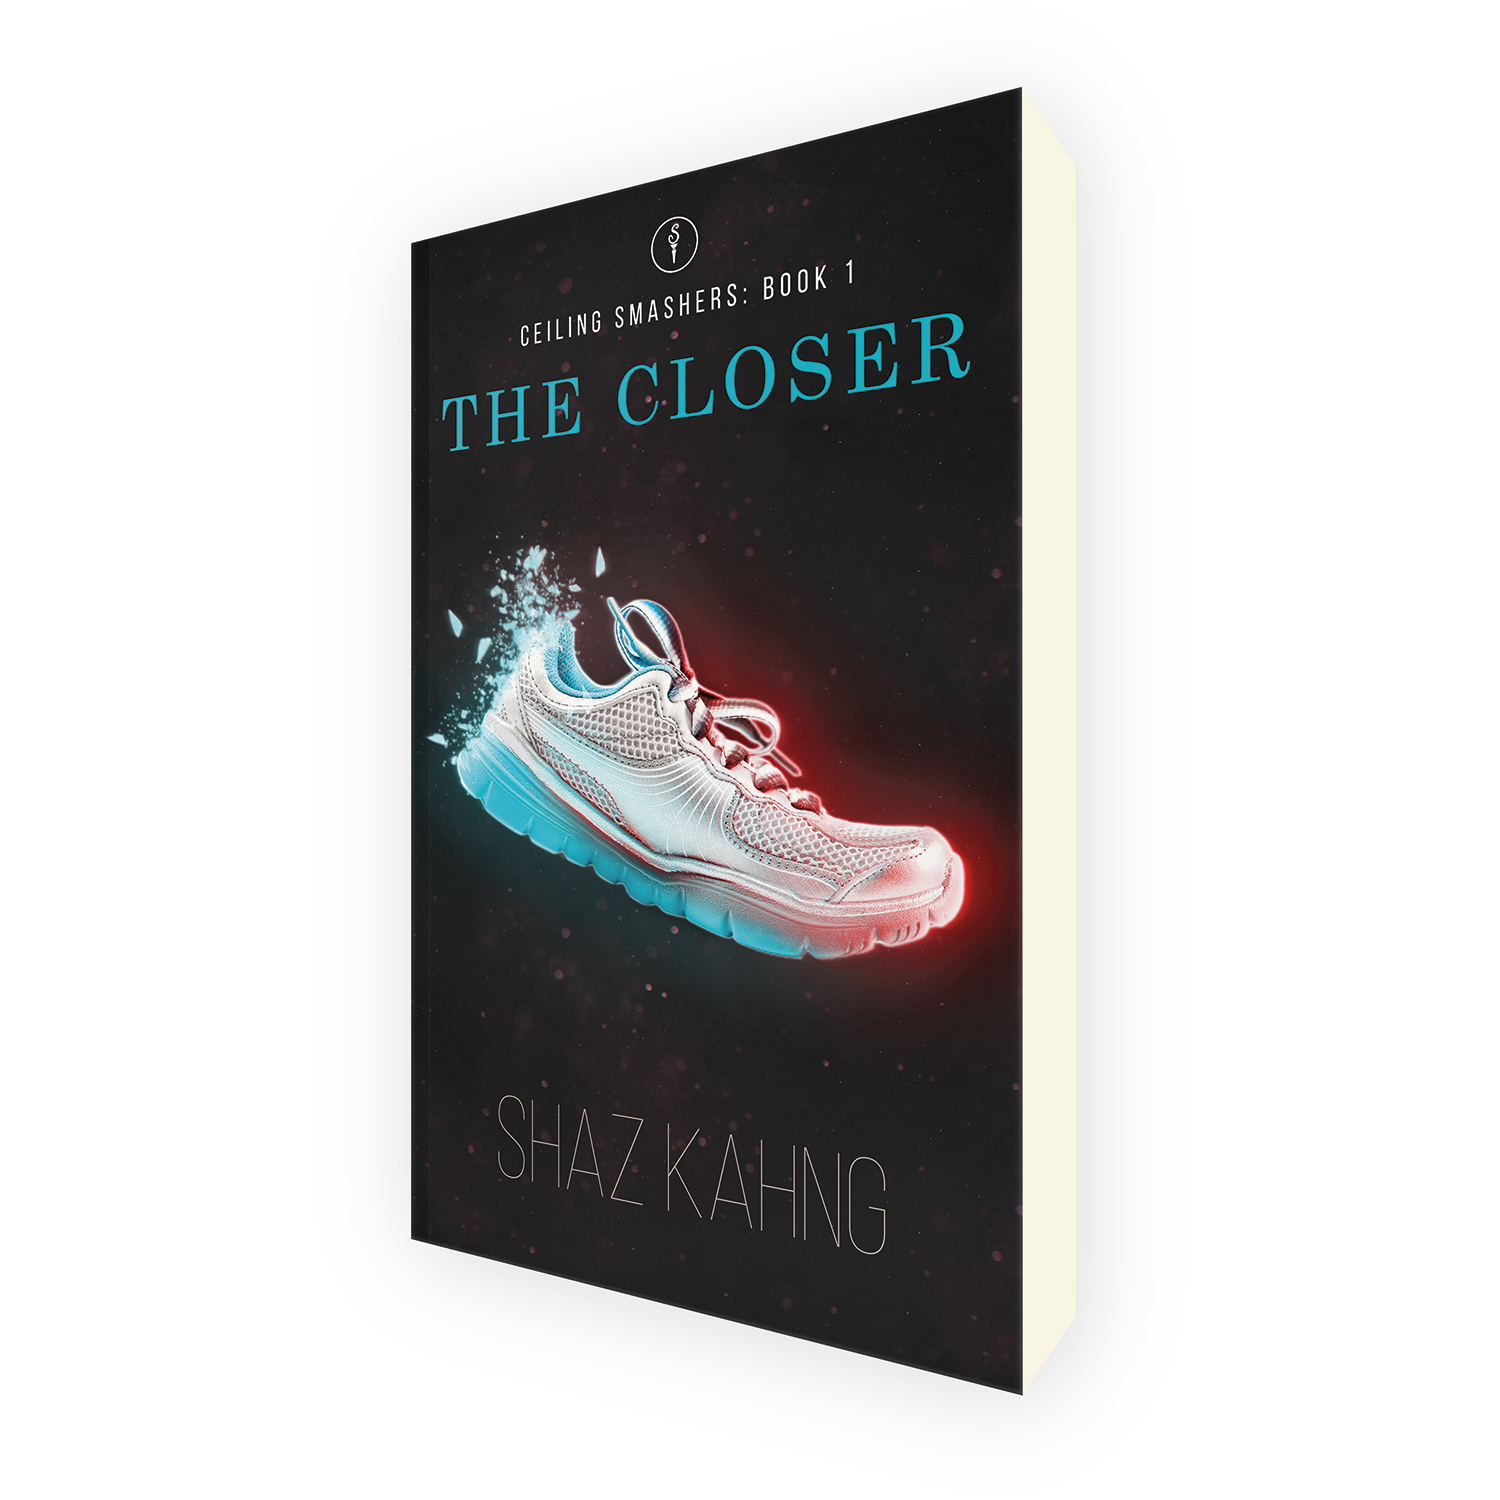 'The Closer' is a female-focussed novel set in the corporate world, by author Shaz Kahng. The book cover and interior were designed by Mark Thomas, of coverness.com. To find out more about my book design services, please visit www.coverness.com.